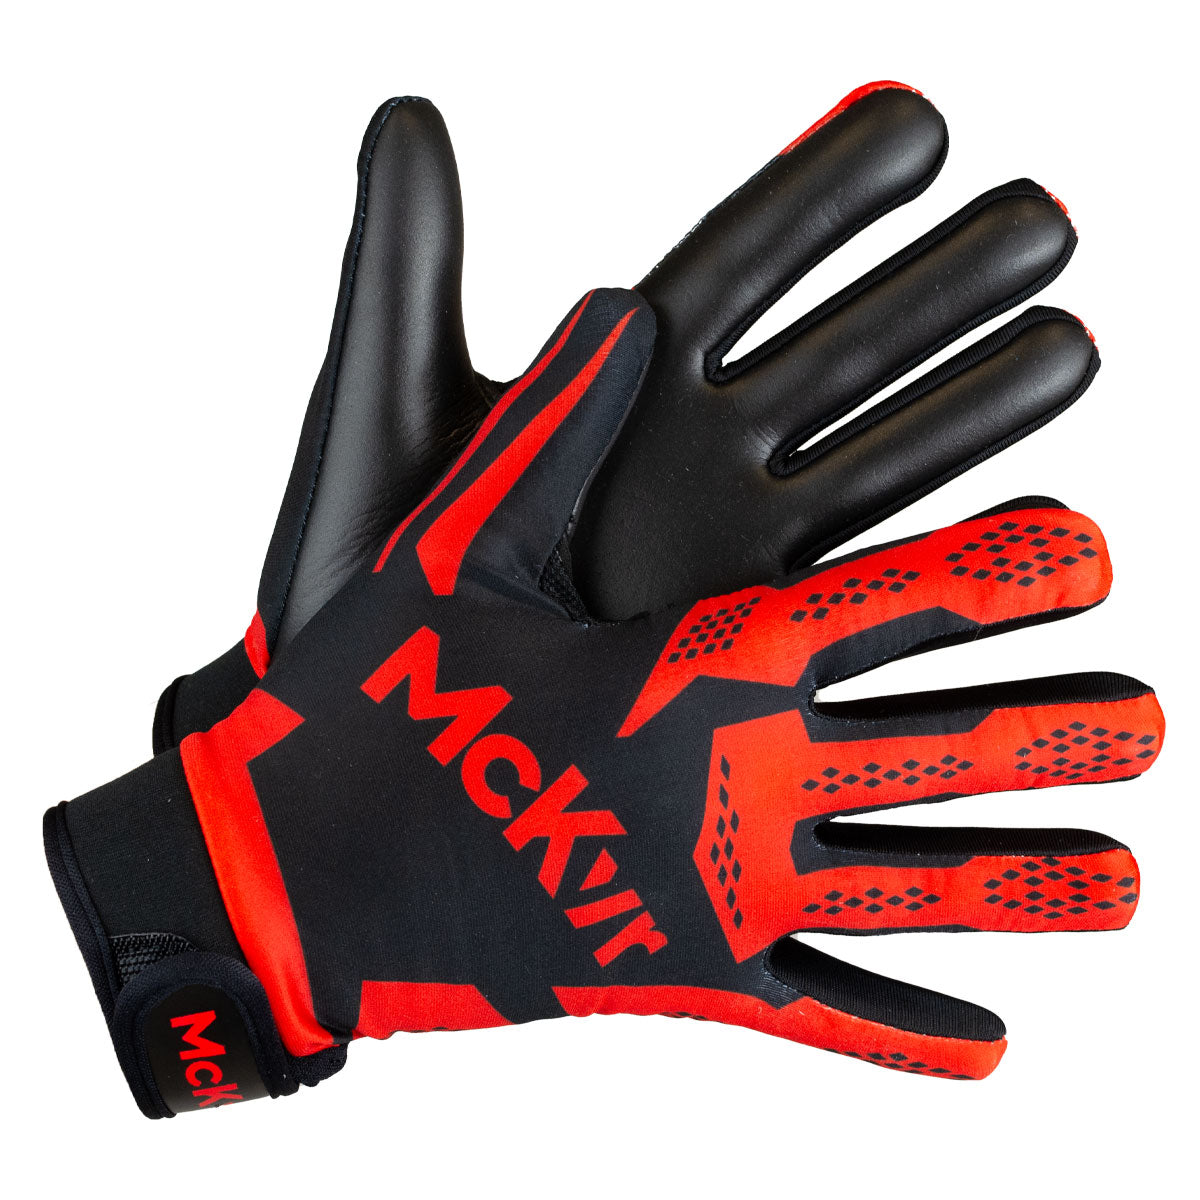 Mc Keever 2.0 Gaelic Gloves - Youth - Black/Red